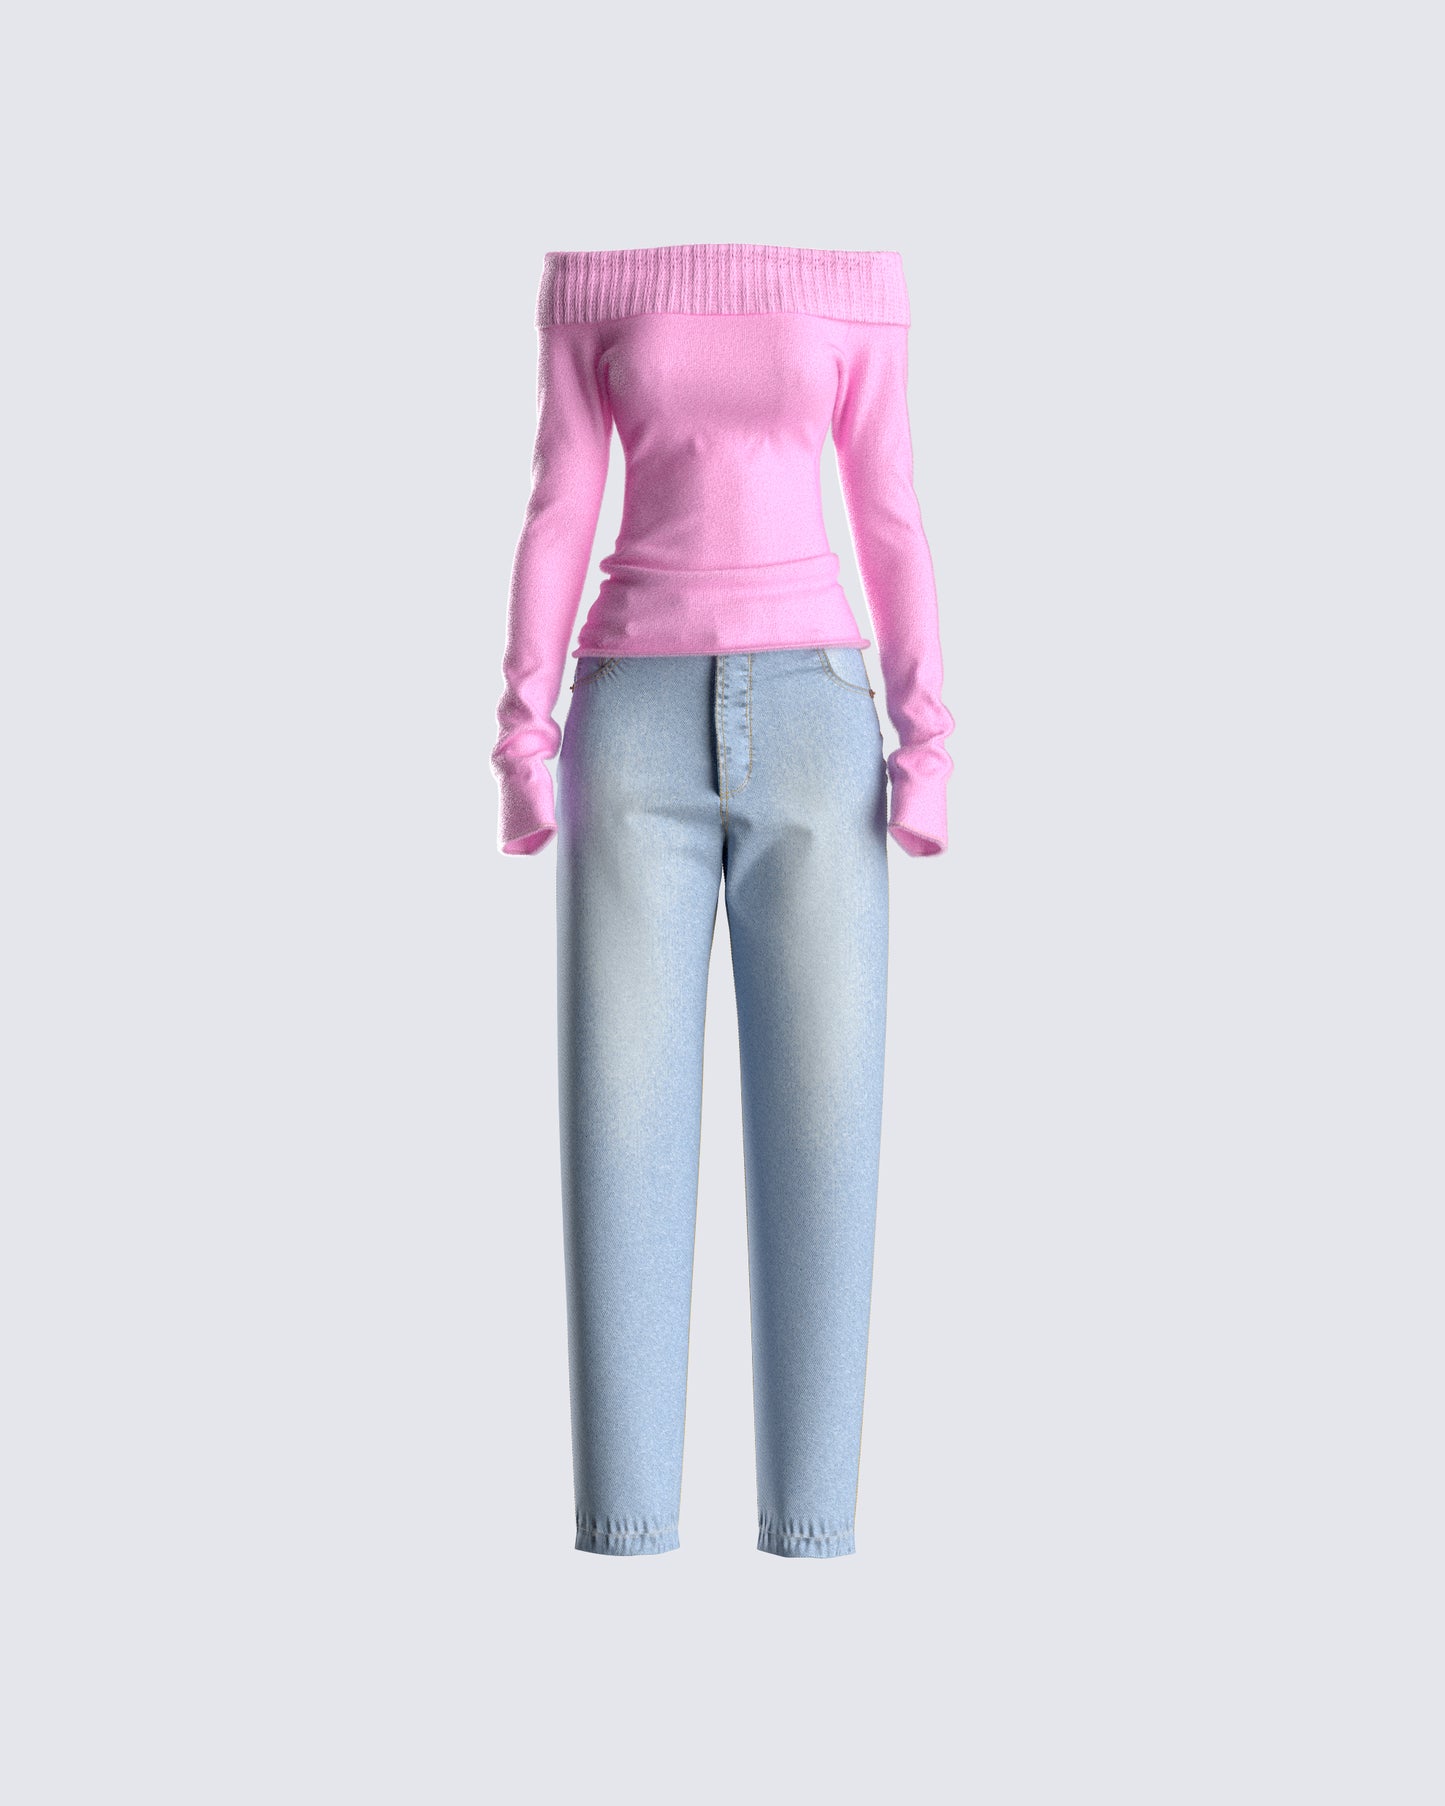 Lorraine Pink Sweater Knit Top  Fashion outfits, Really cute outfits,  2000s fashion outfits